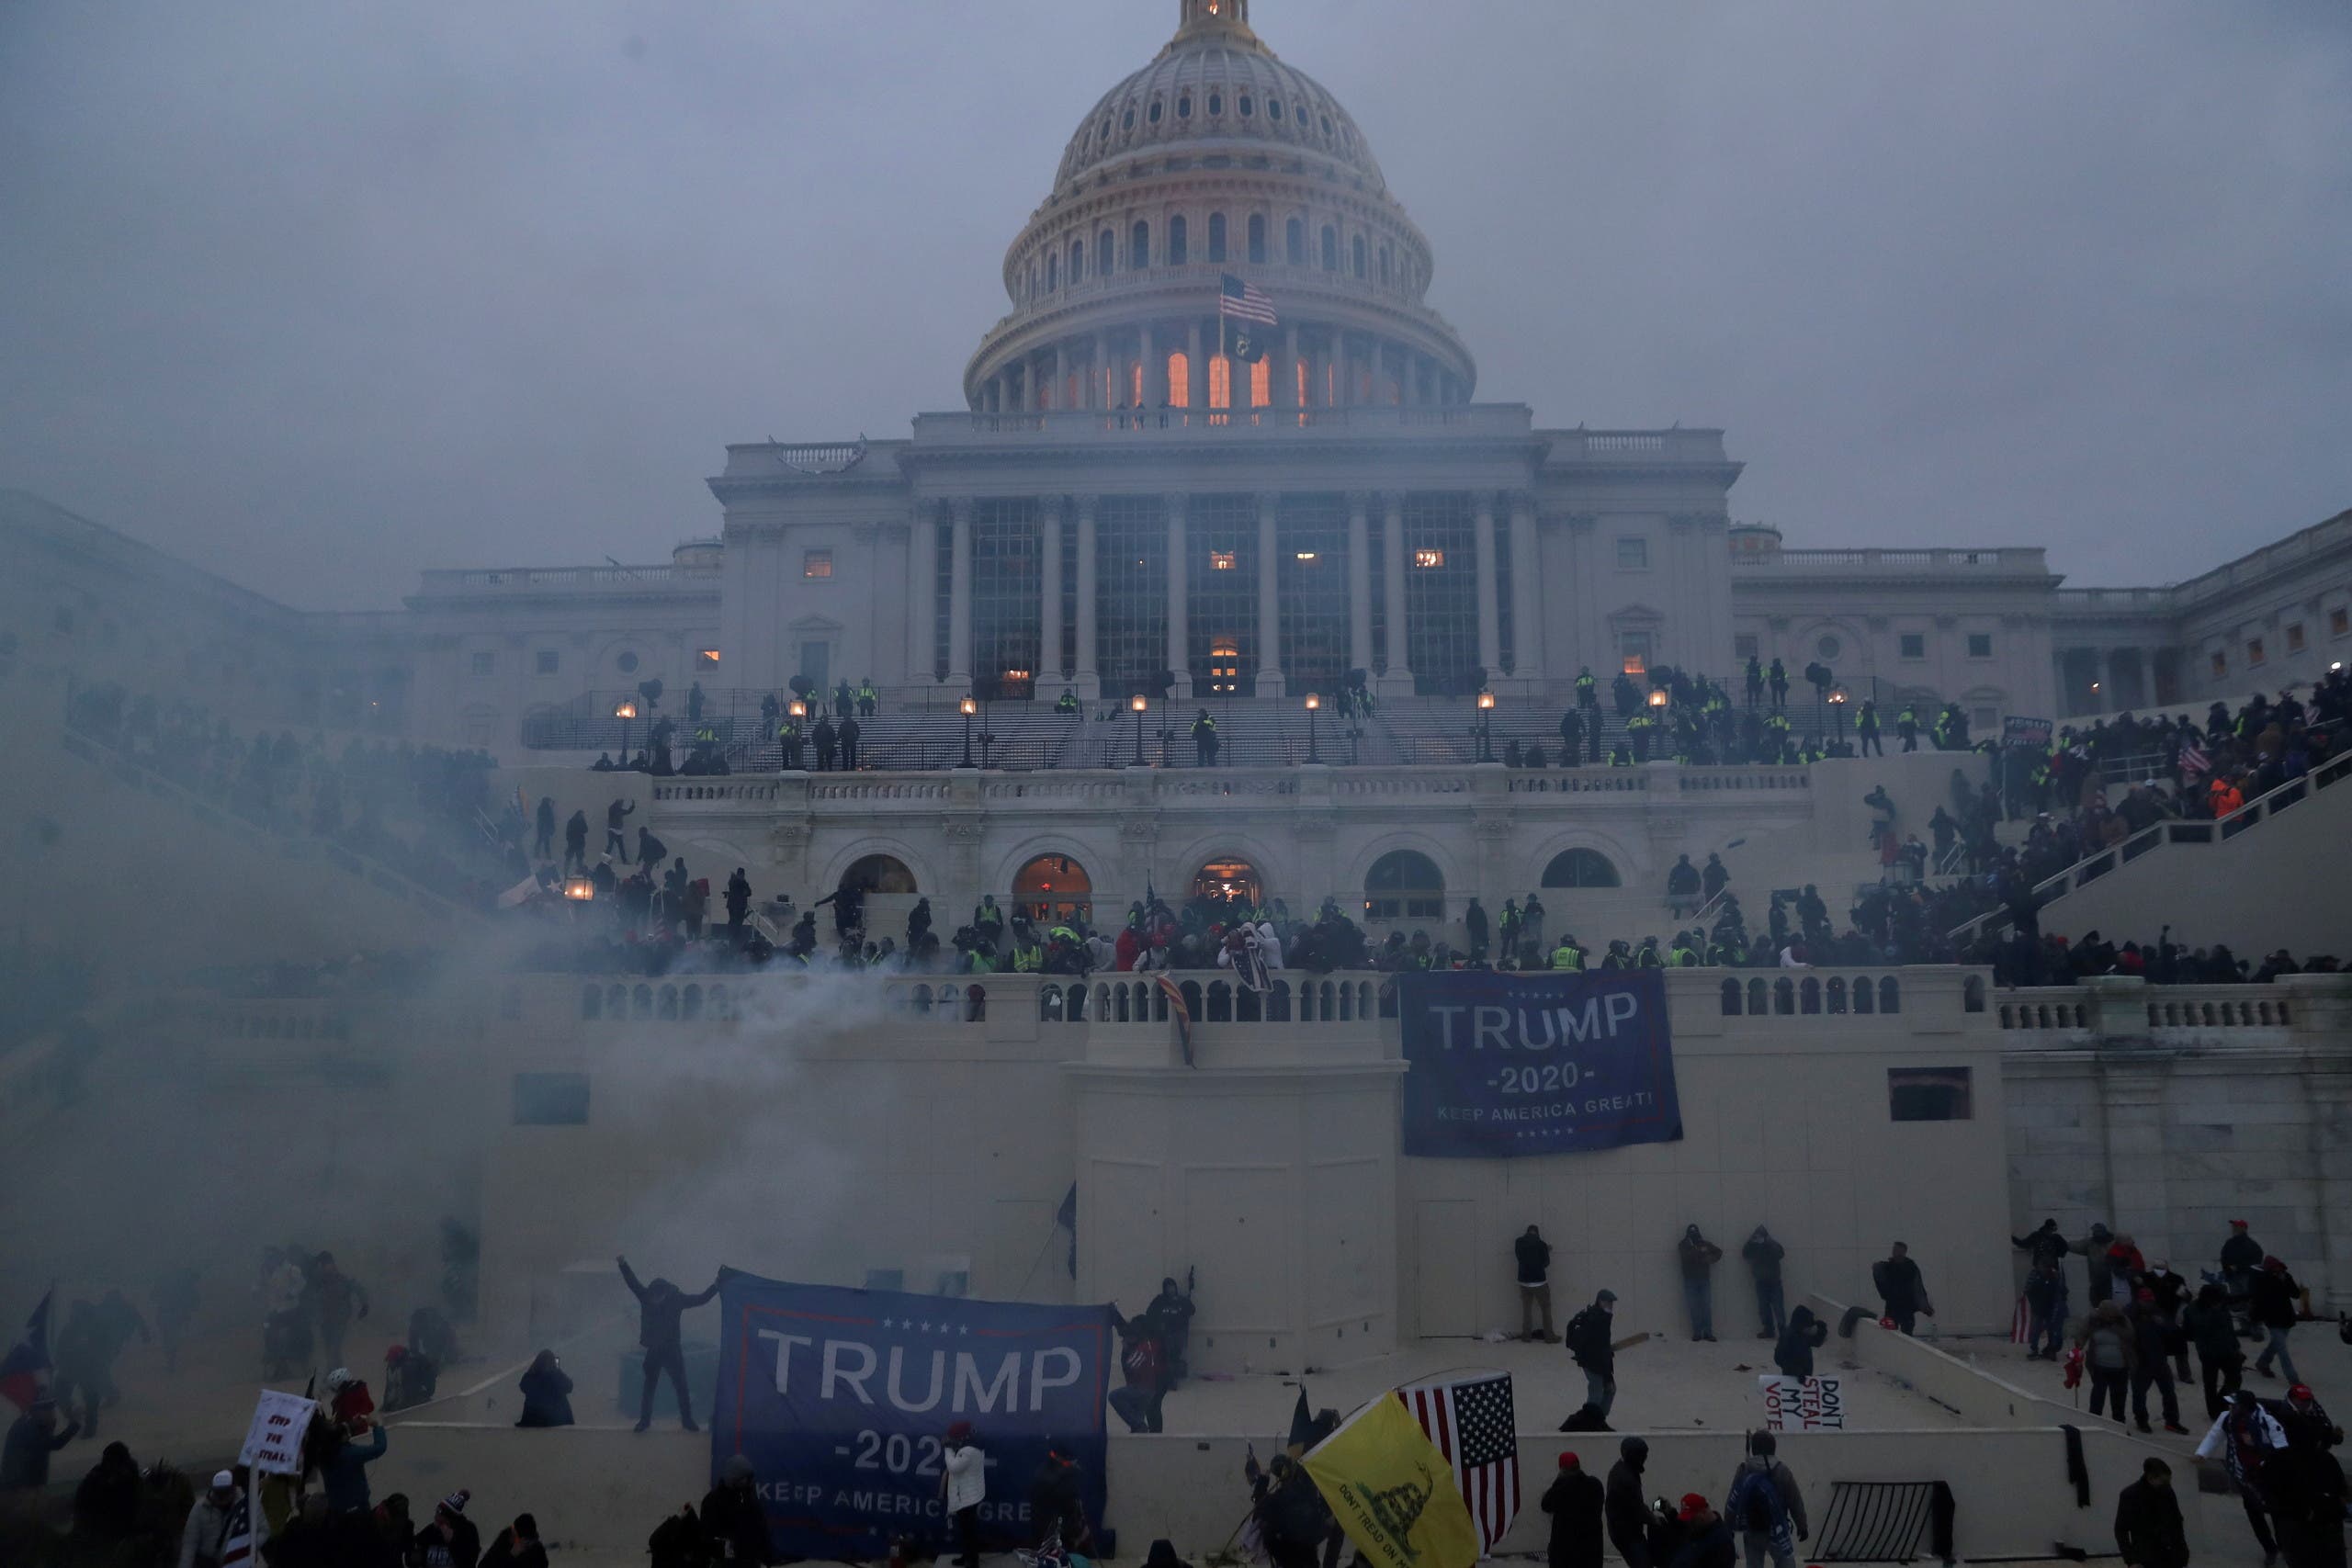 A file photo shows police officers stand guard as supporters of then President Trump gather in front of the US Capitol Building in Washington, US, January 6, 2021. (Reuters/Leah Millis)